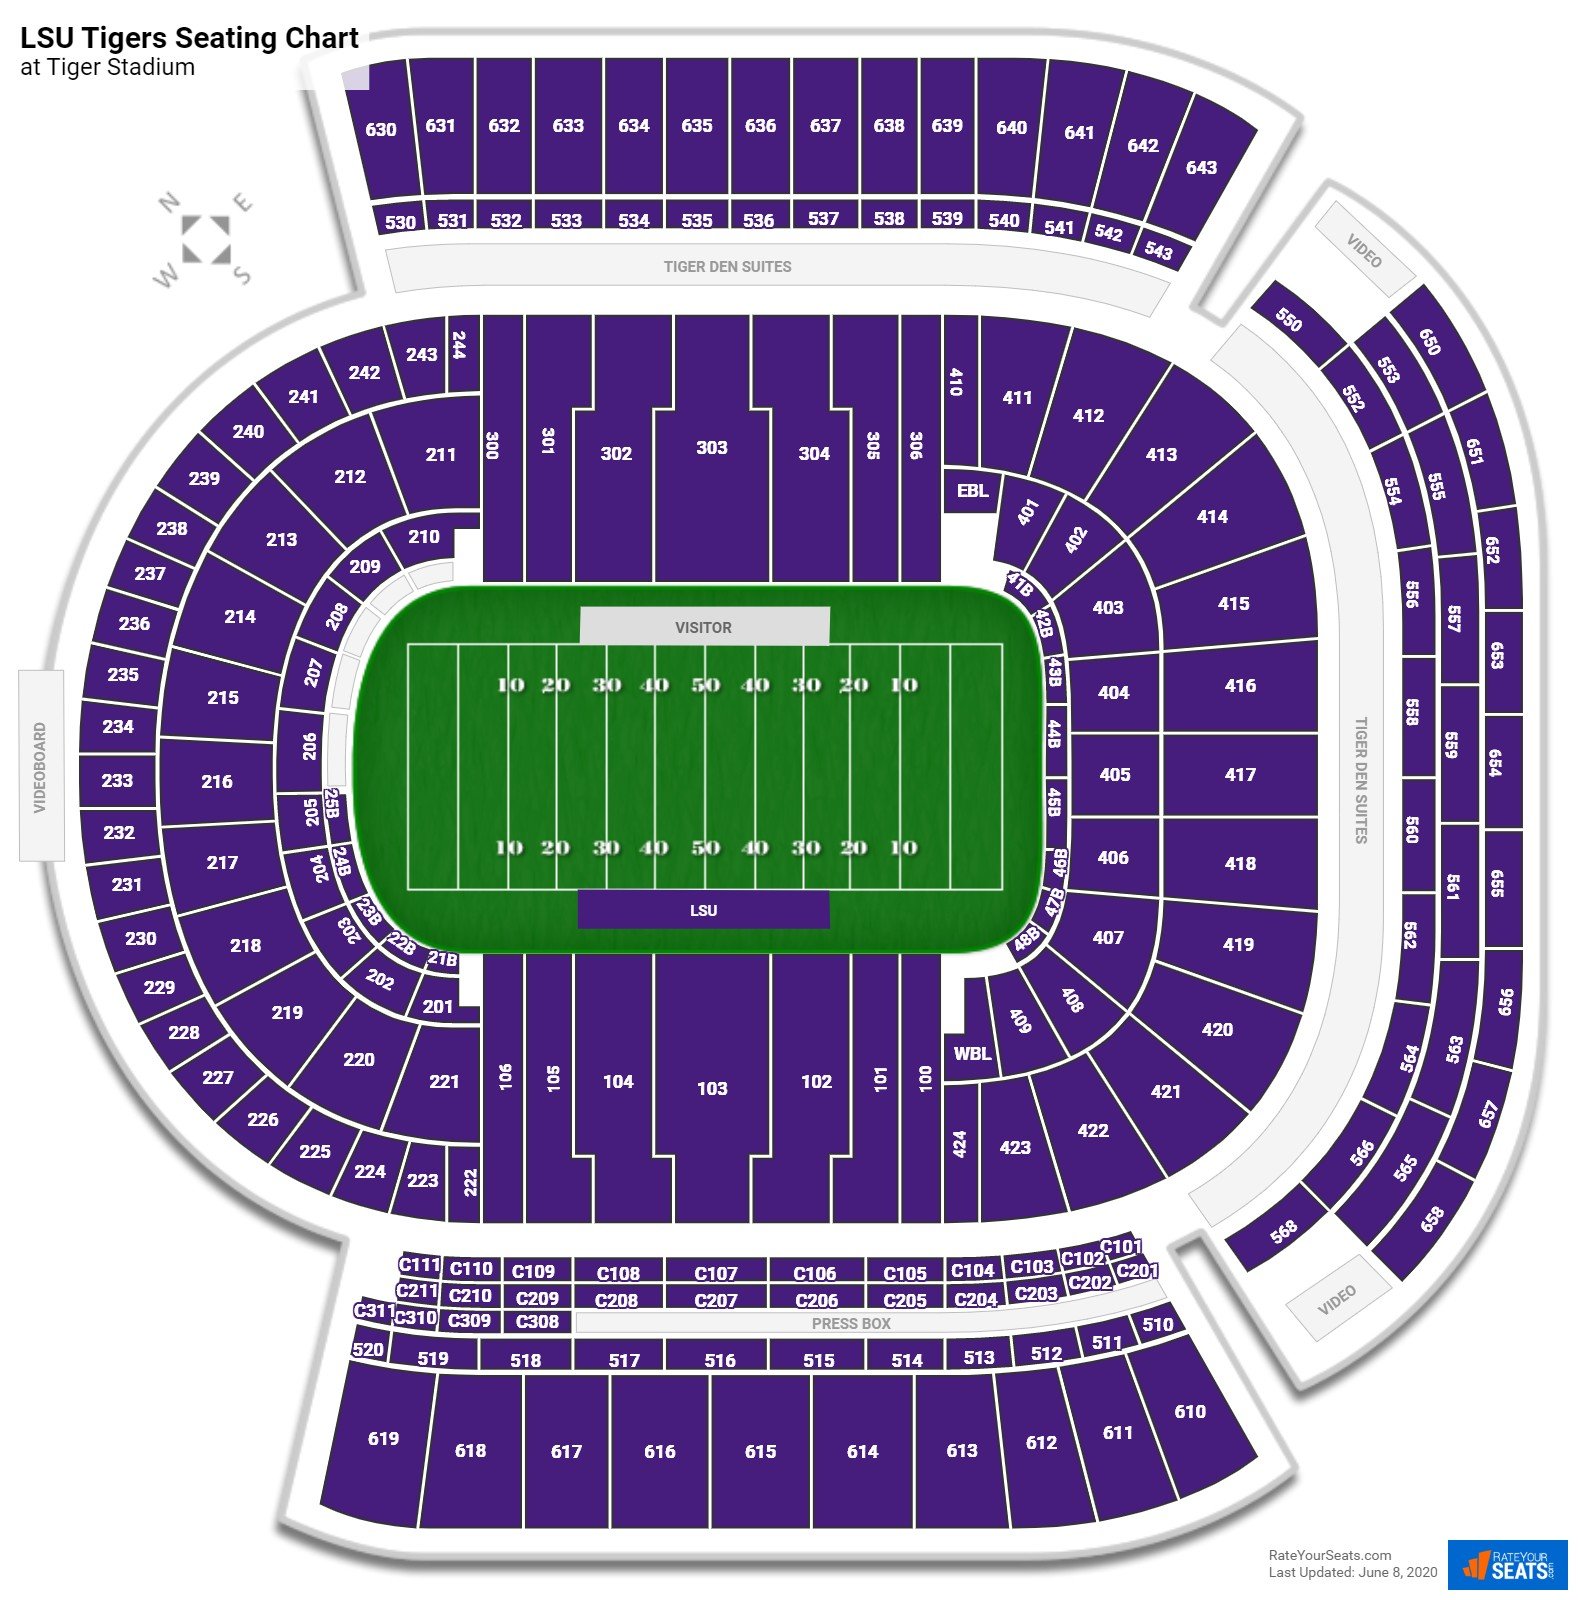 Where does your stadium seat it's visiting fans? : r/CFB